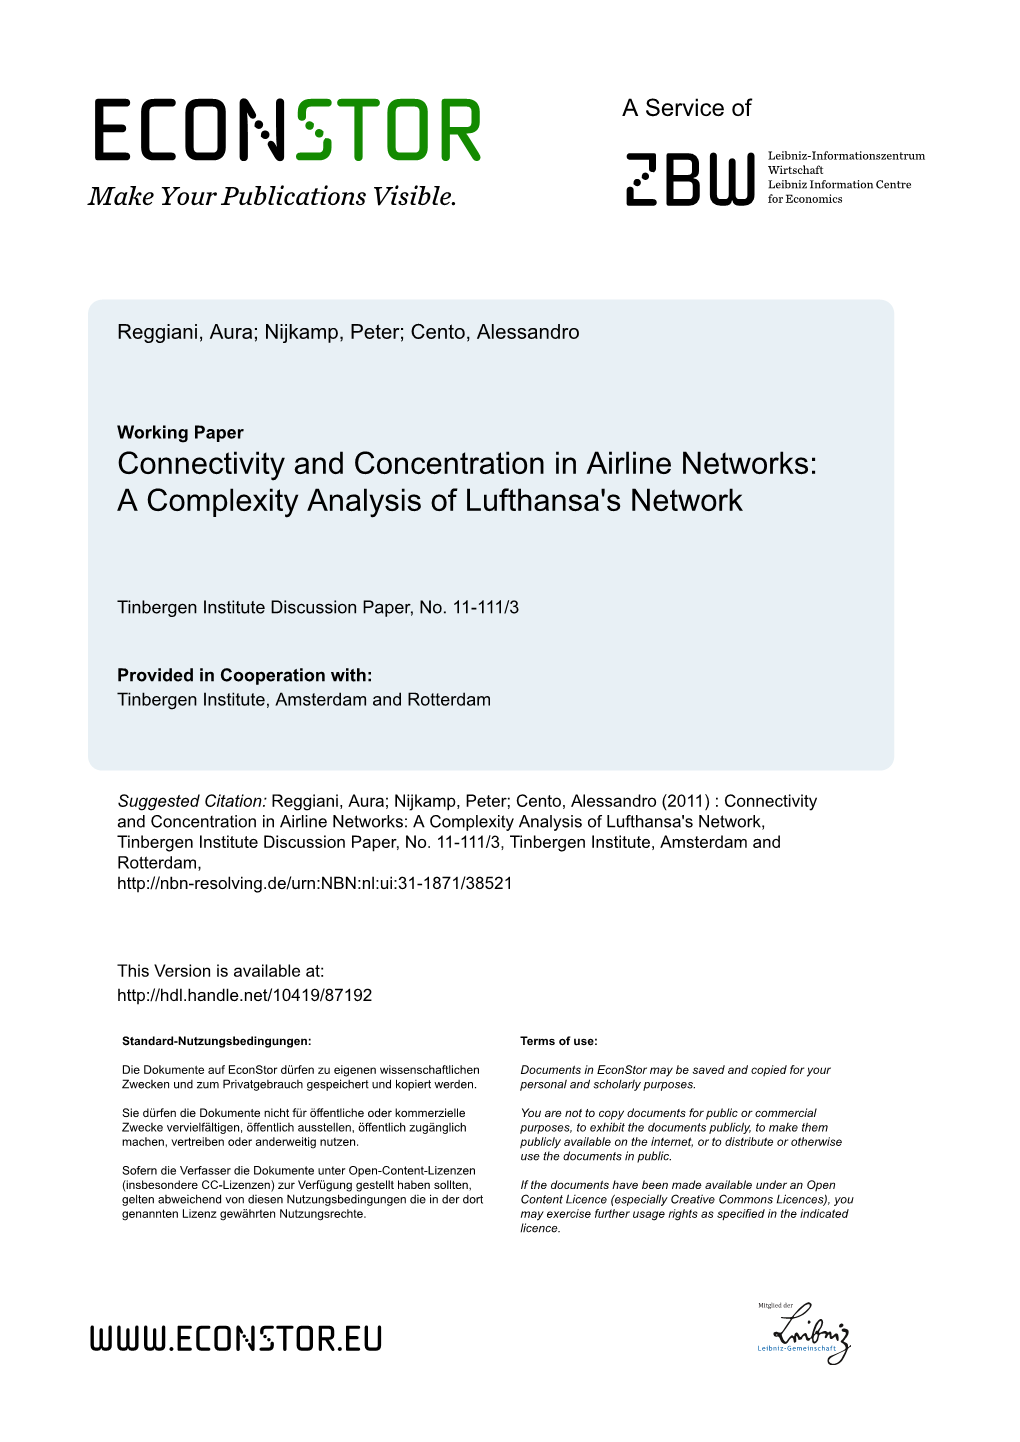 Connectivity and Concentration in Airline Networks: a Complexity Analysis of Lufthansa's Network